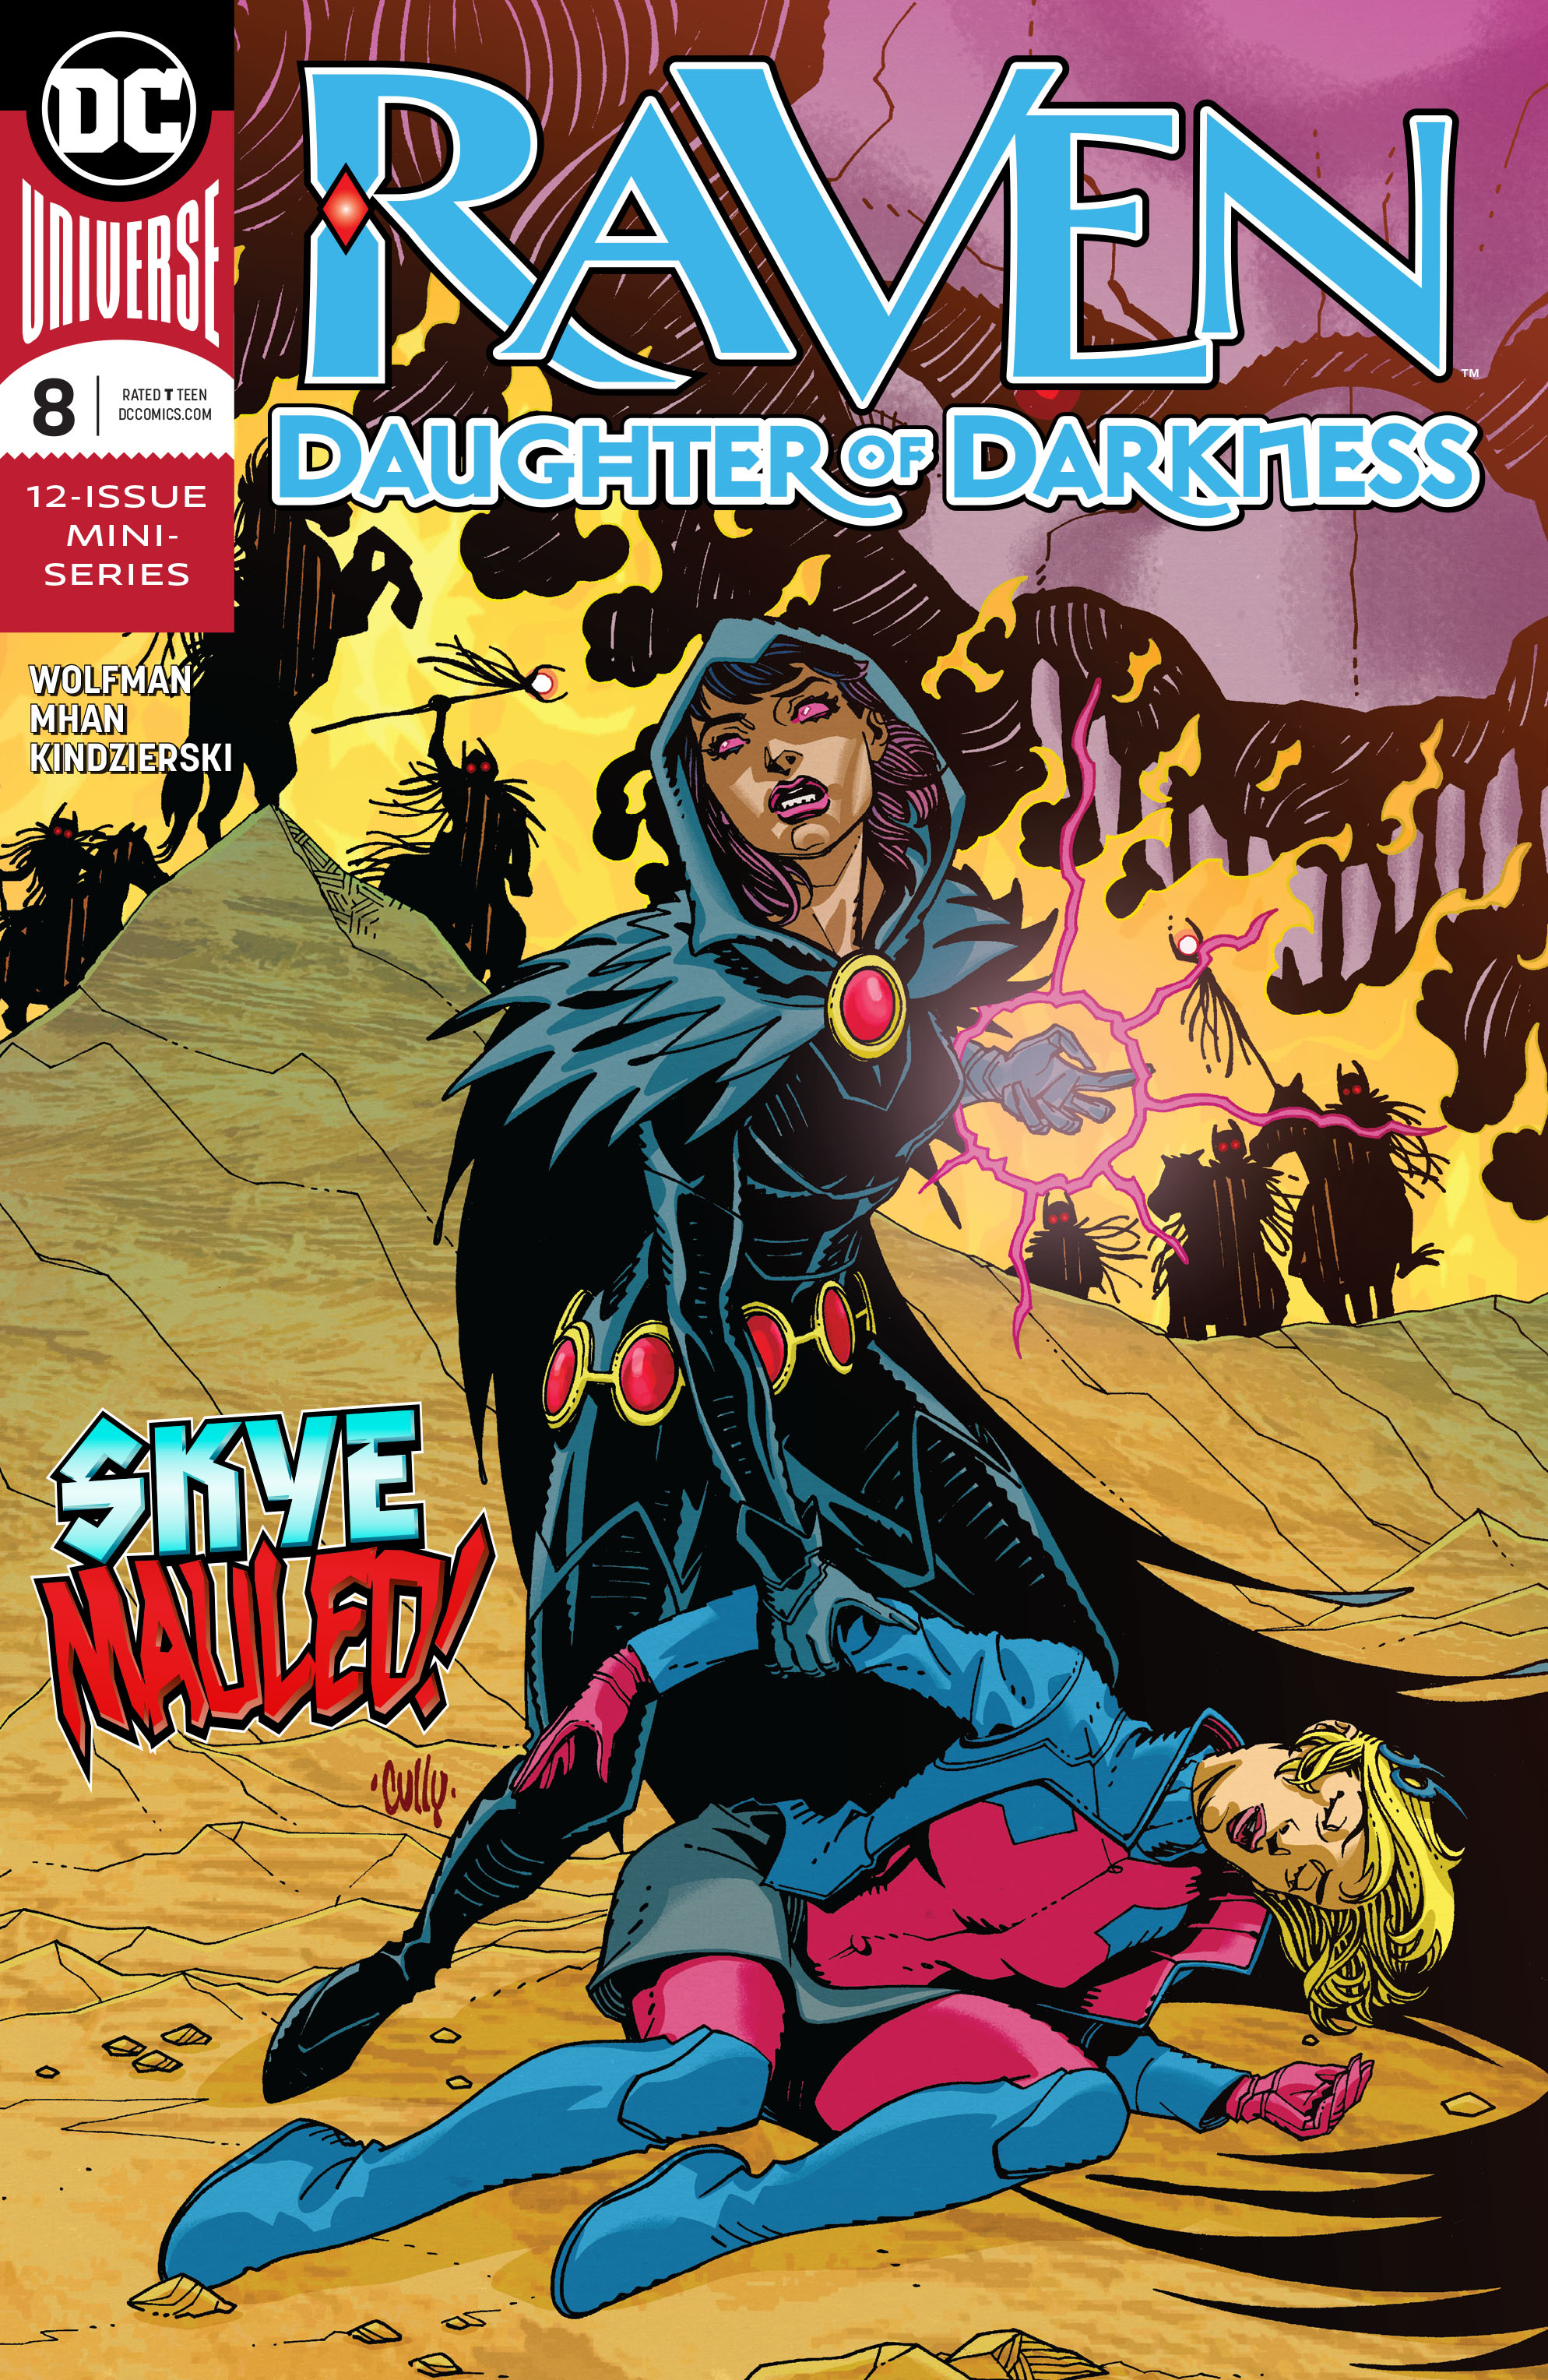 Raven: Daughter of Darkness no. 8 (8 of 12) (2018 Series)